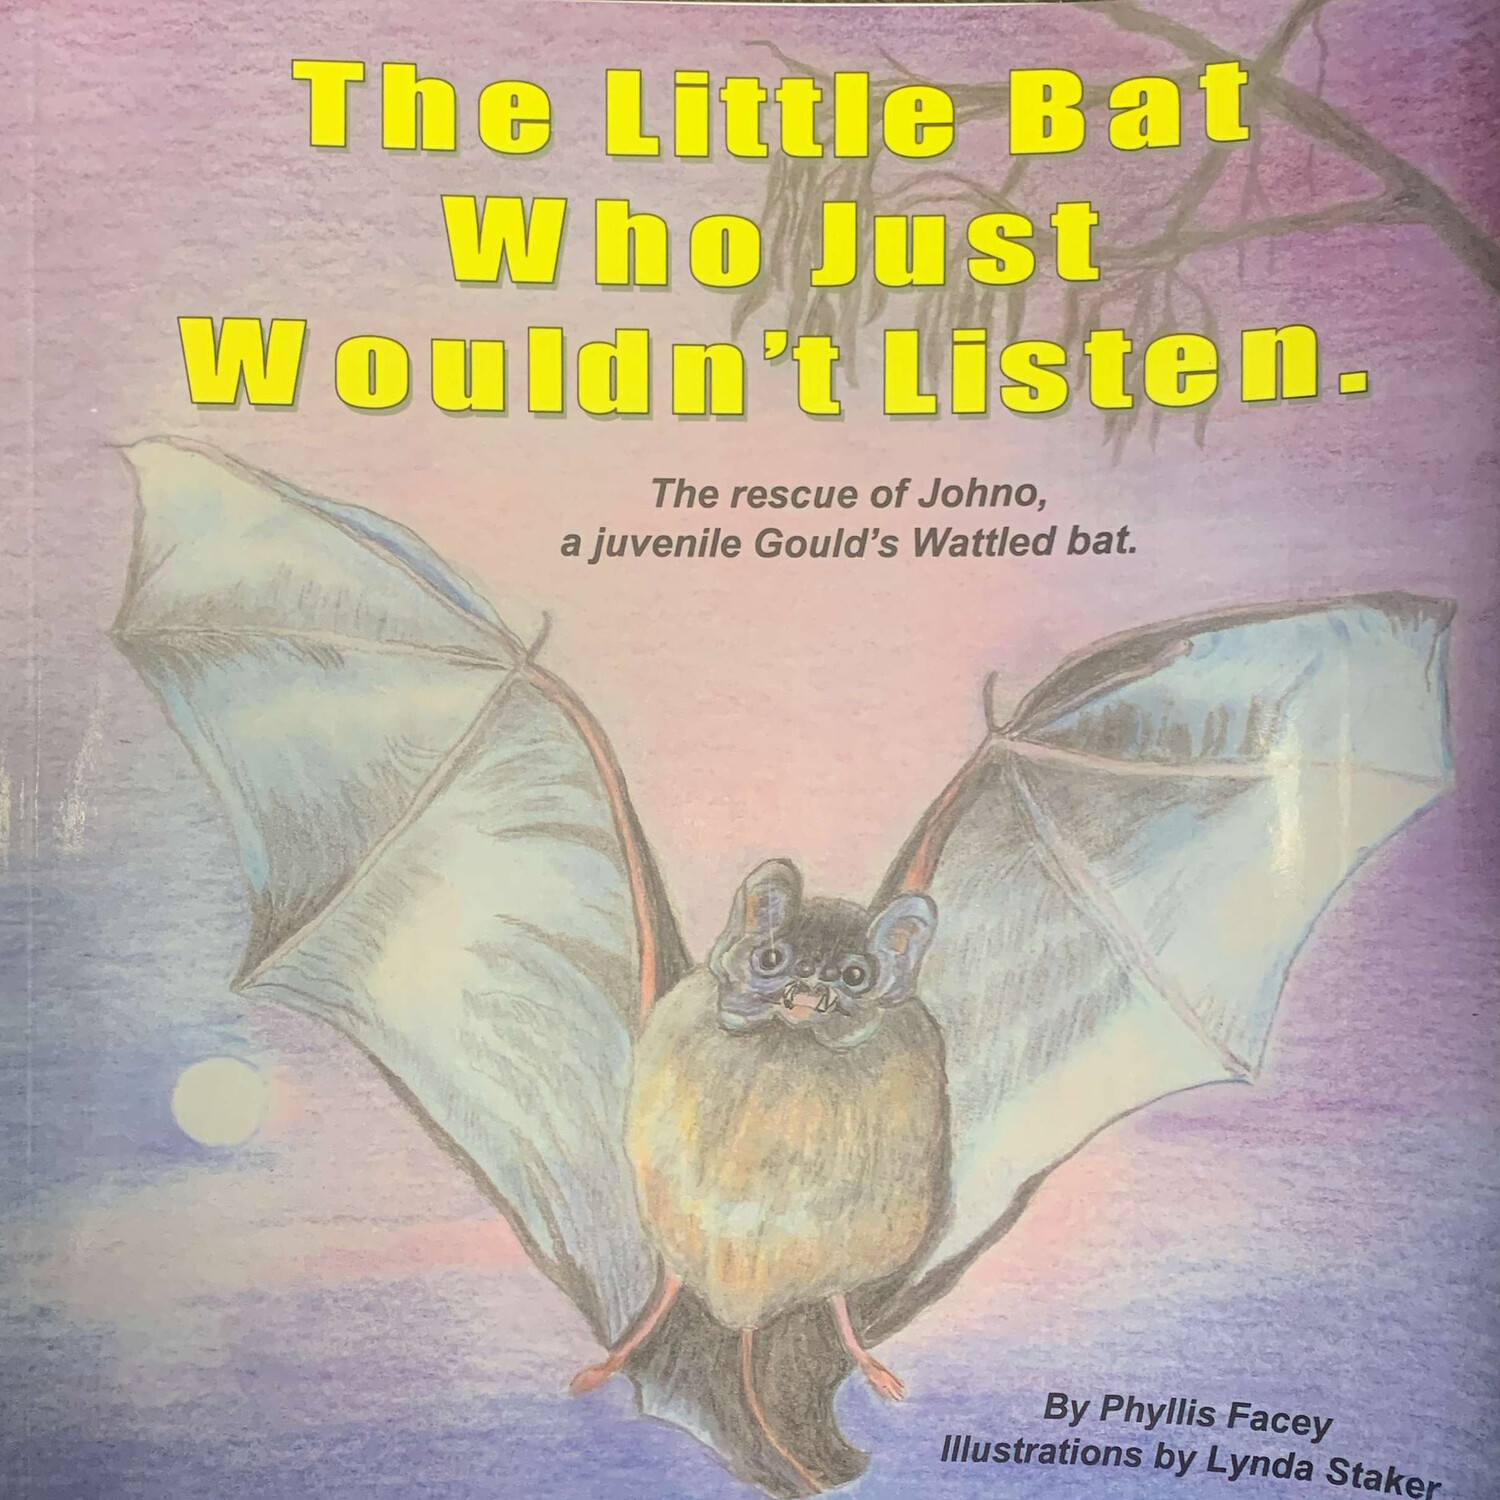 The Little Bat Who Just Wouldn’t Listen Storybook